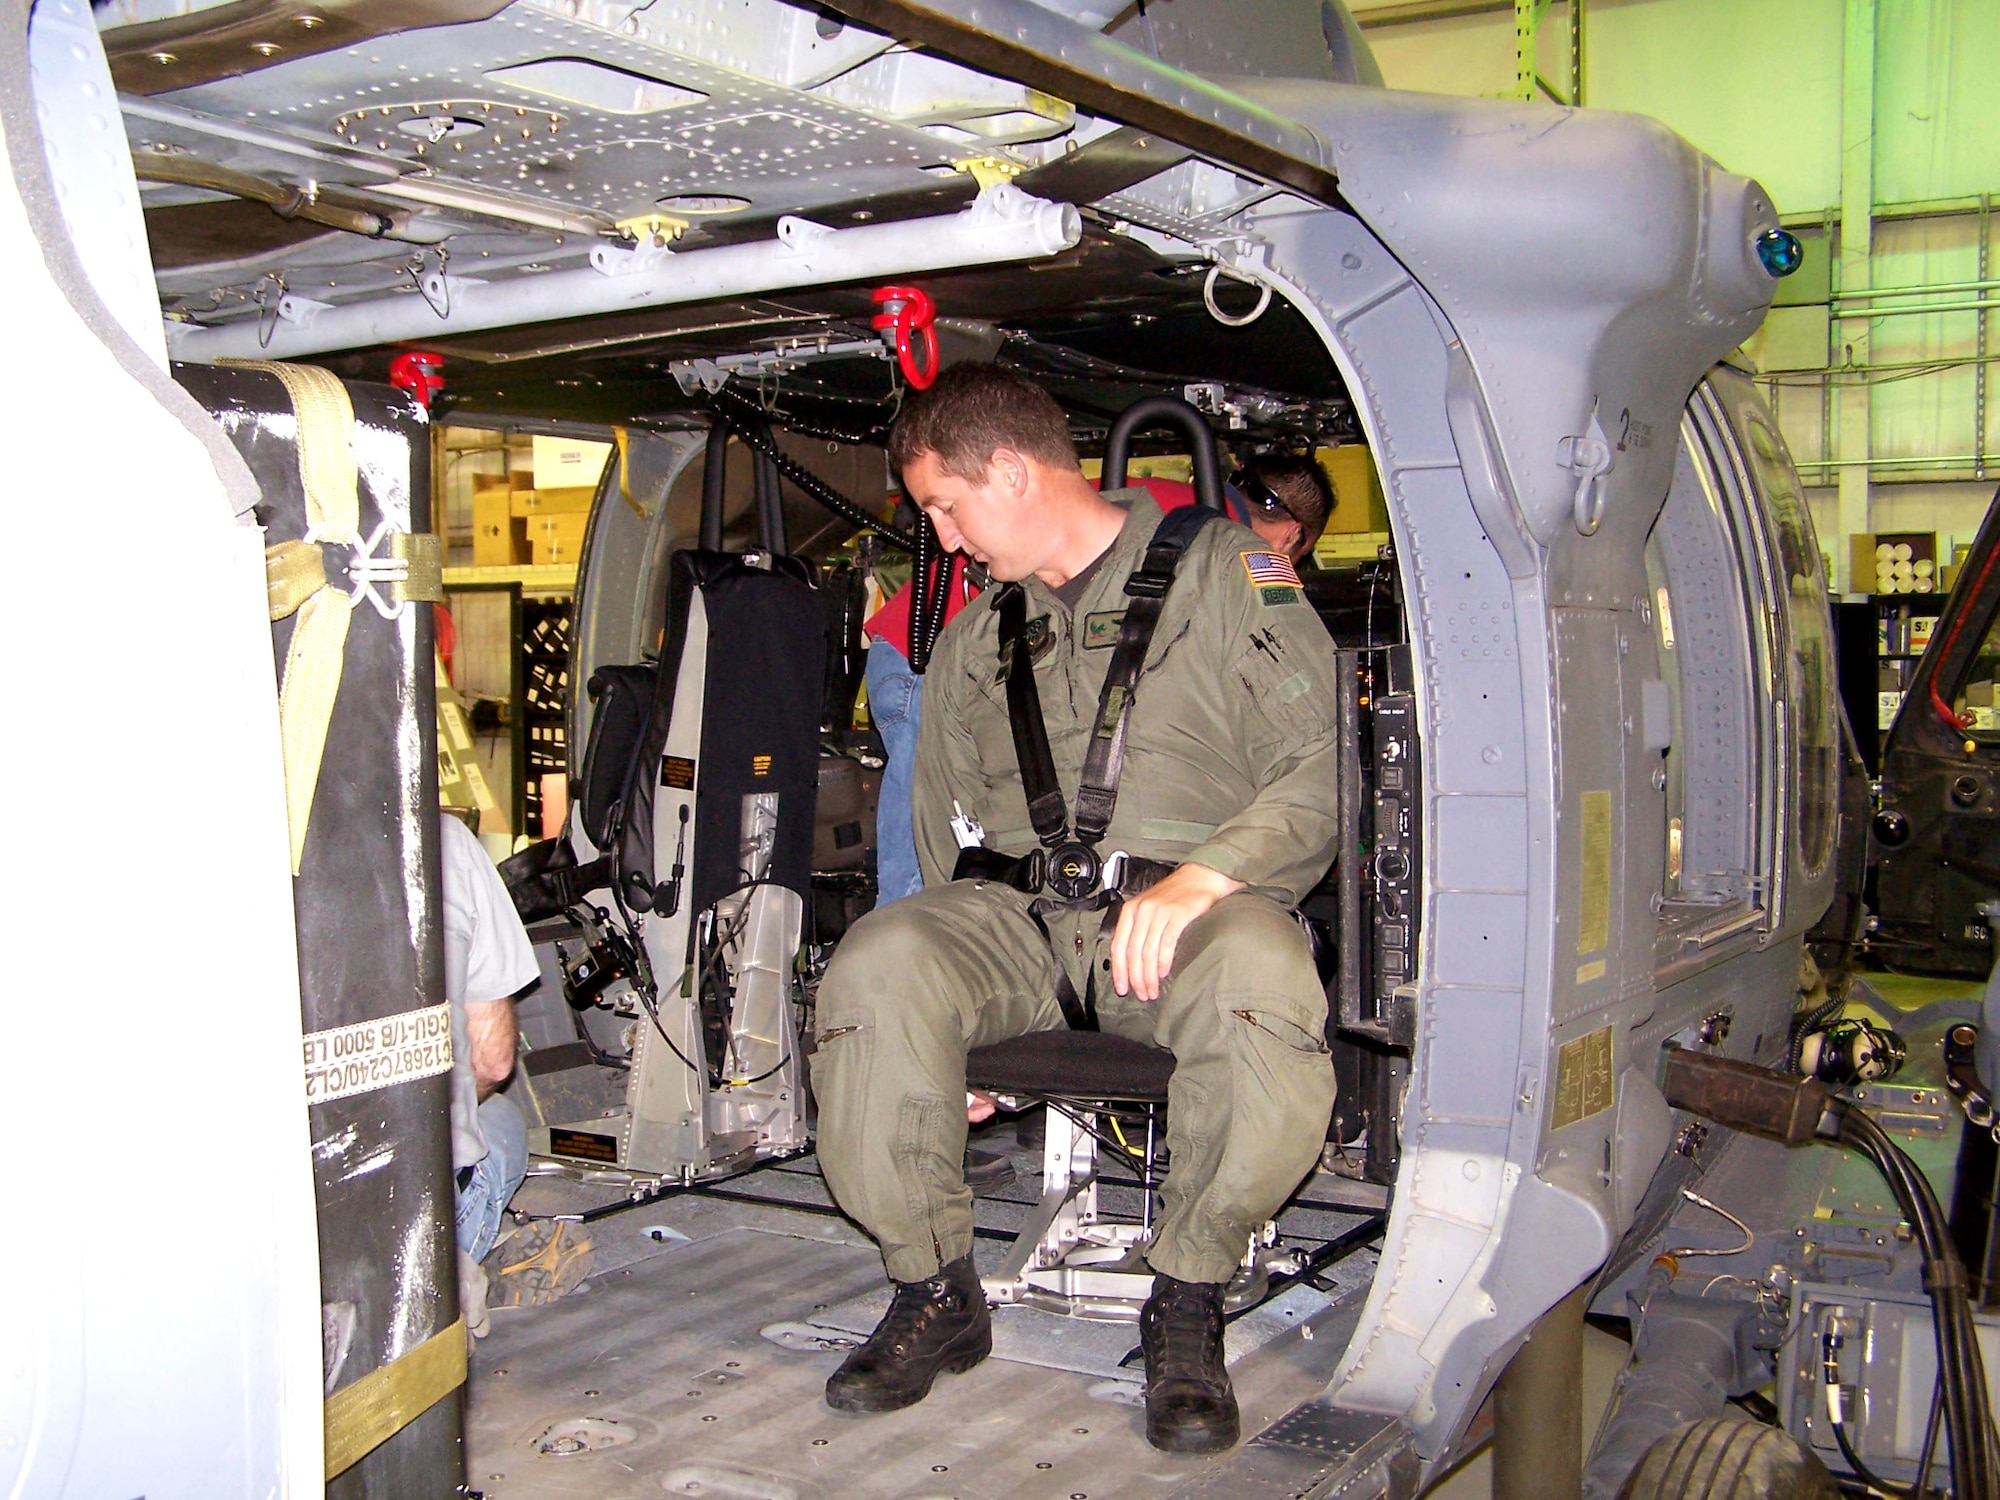 DAVIS-MONTHAN AIR FORCE BASE, Ariz. -- Senior Master Sgt. Michael Flake checks out the new, more ergonomic crew cabin seats being installed in Air Force Reserve Command HH-60G Pave Hawk helicopters.  By the end of the year, all 15 of the command's HH-60Gs will have new seats as well as new fuel tanks in the crew cabin area, giving pararescue and special operations teams more space to operate during combat-search-and-rescue missions.  Sergeant Flake is the lead engineer for the seat replacement project and is assigned to the 305th Rescue Squadron here.  (U.S. Air Force photo by Fred Cusick)